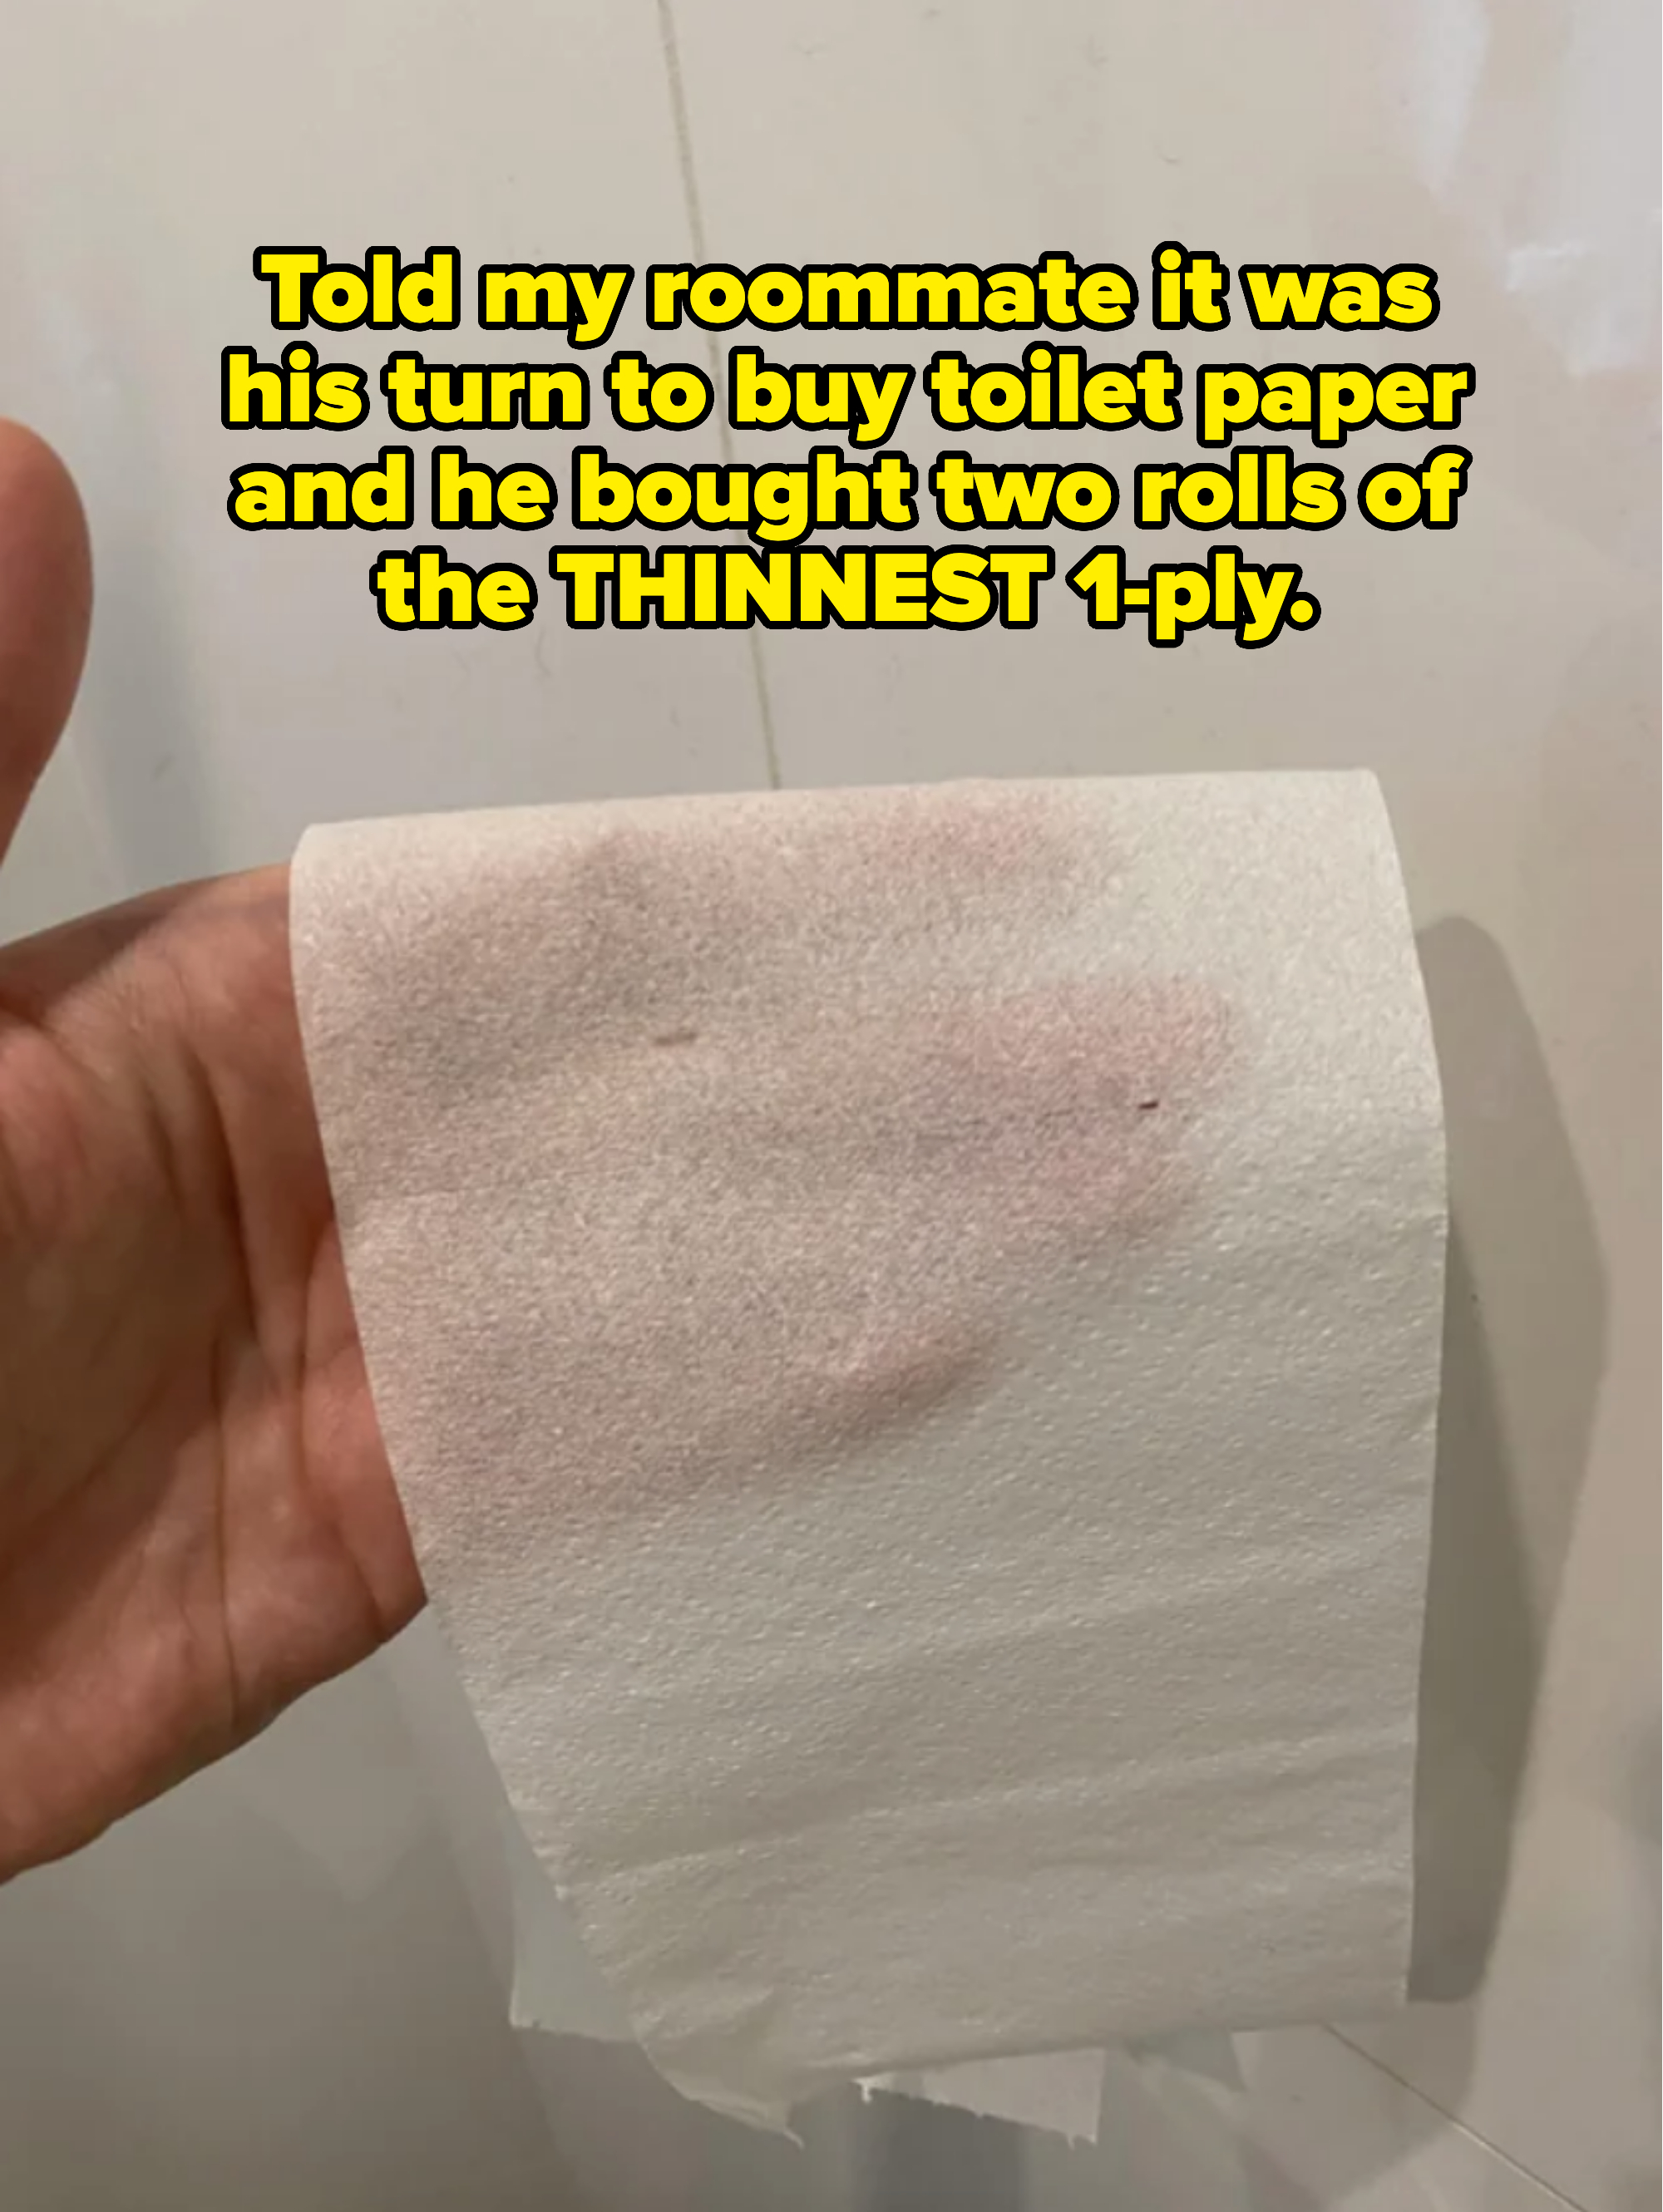 the thinest toilet paper